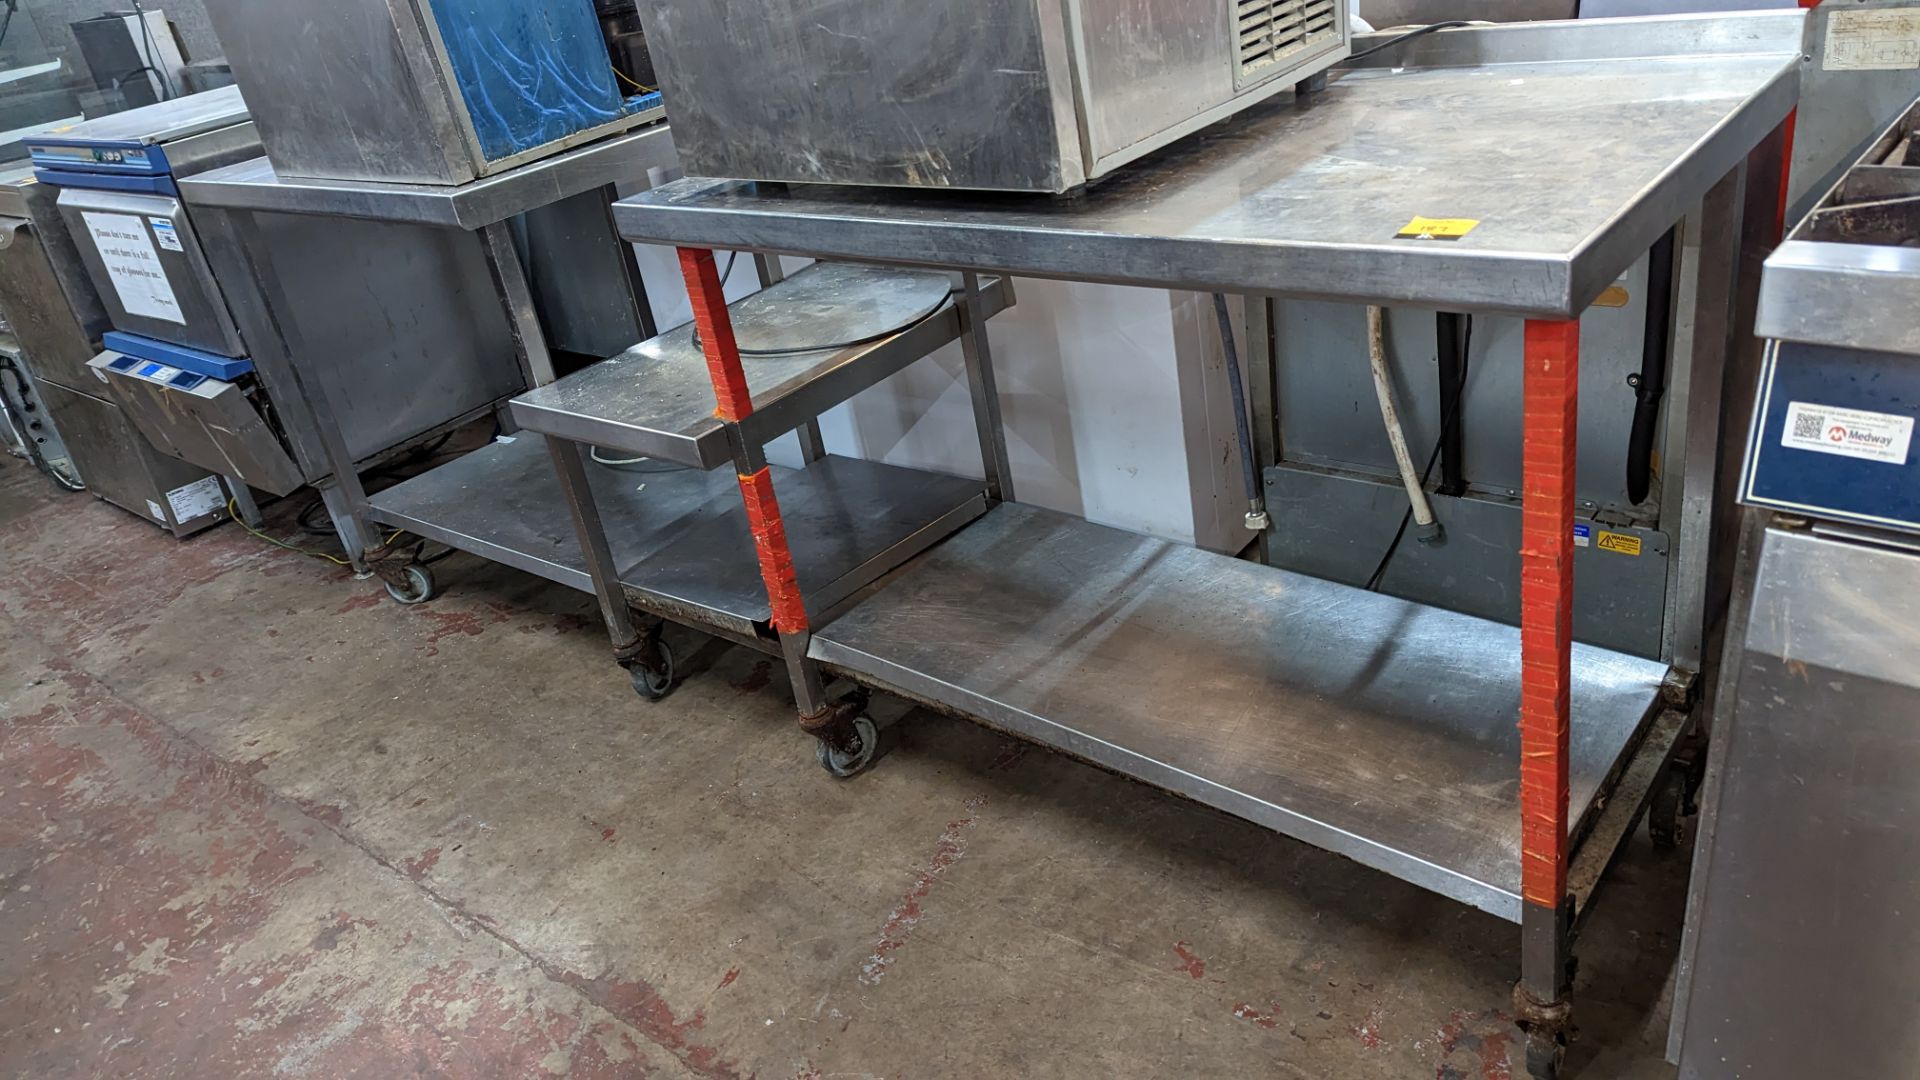 Very large mobile stainless steel multi-tier trolley/shelving unit with max overall dimensions of ap